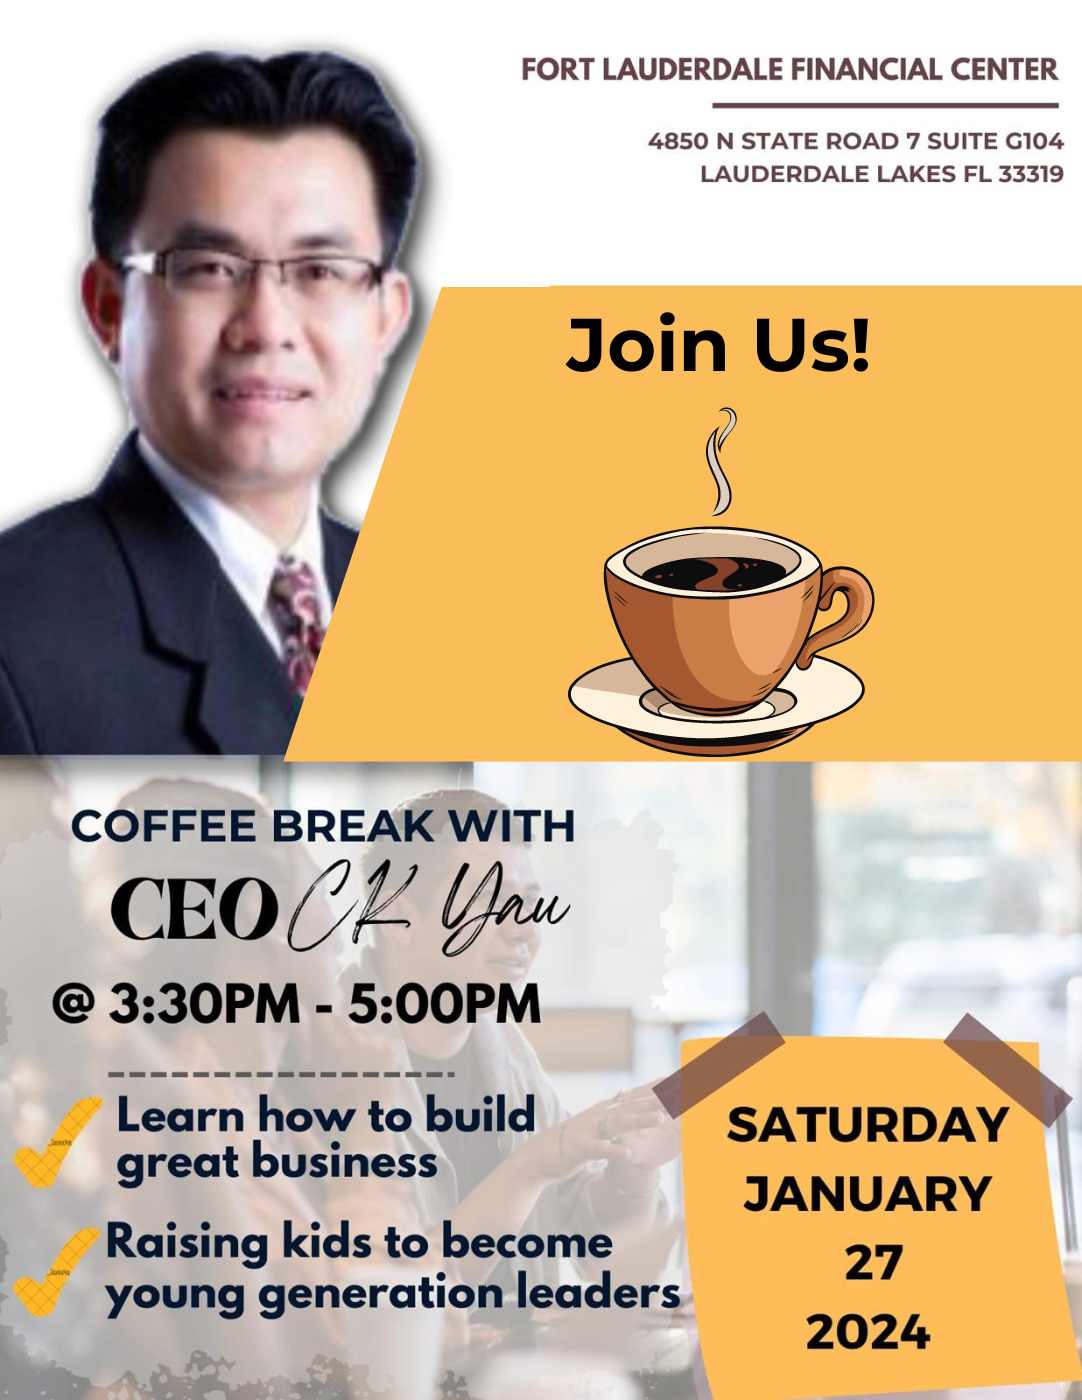 Join Us! Coffee Break with CEO CK Yau